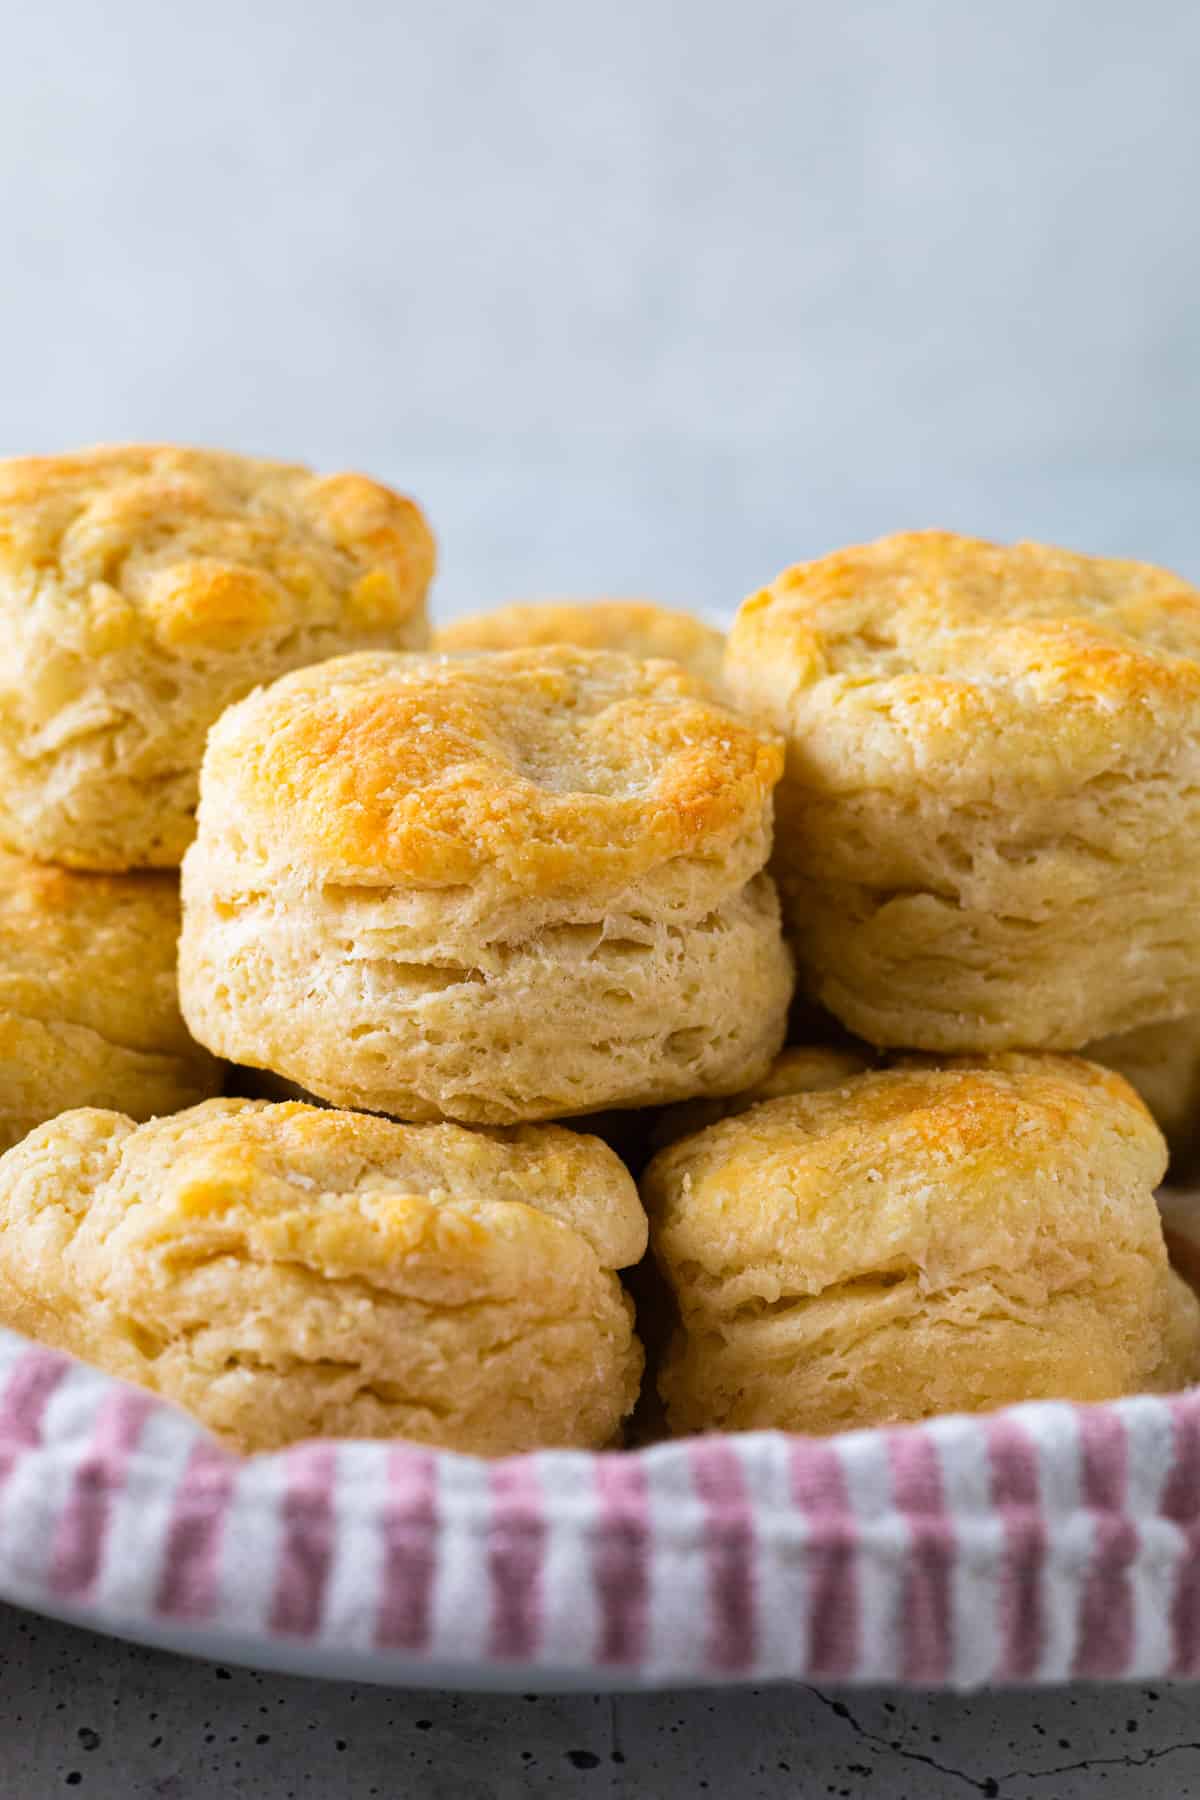 Biscuits stacked in a cloth-lined bowl.